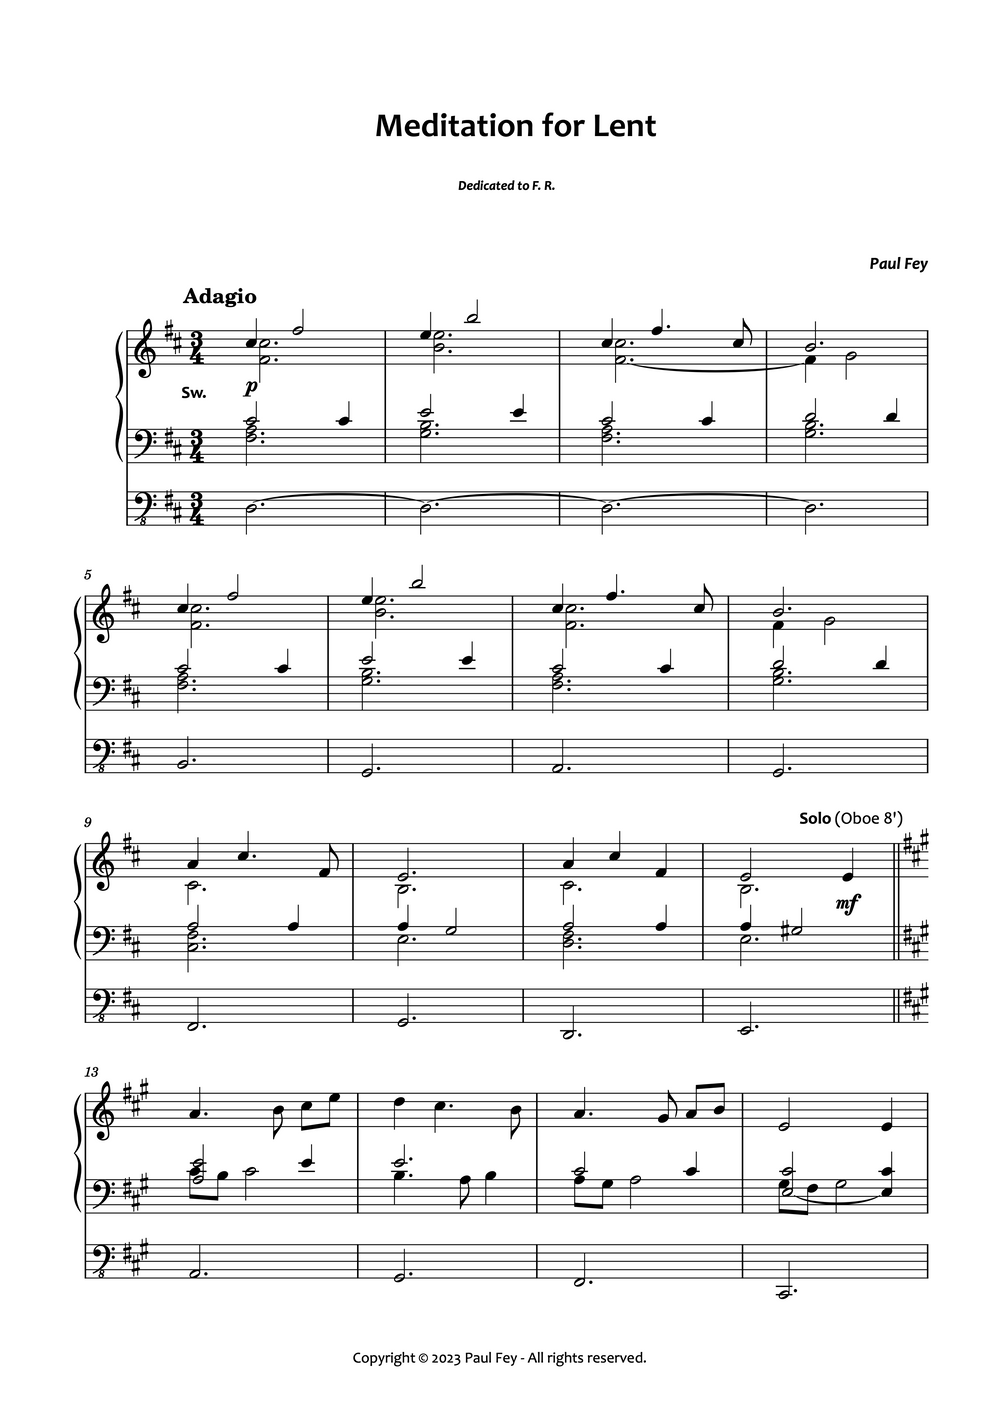 Meditation for Lent (Sheet Music) - Music for Organ by Paul Fey Organist And Famous Organ Musician on YouTube 